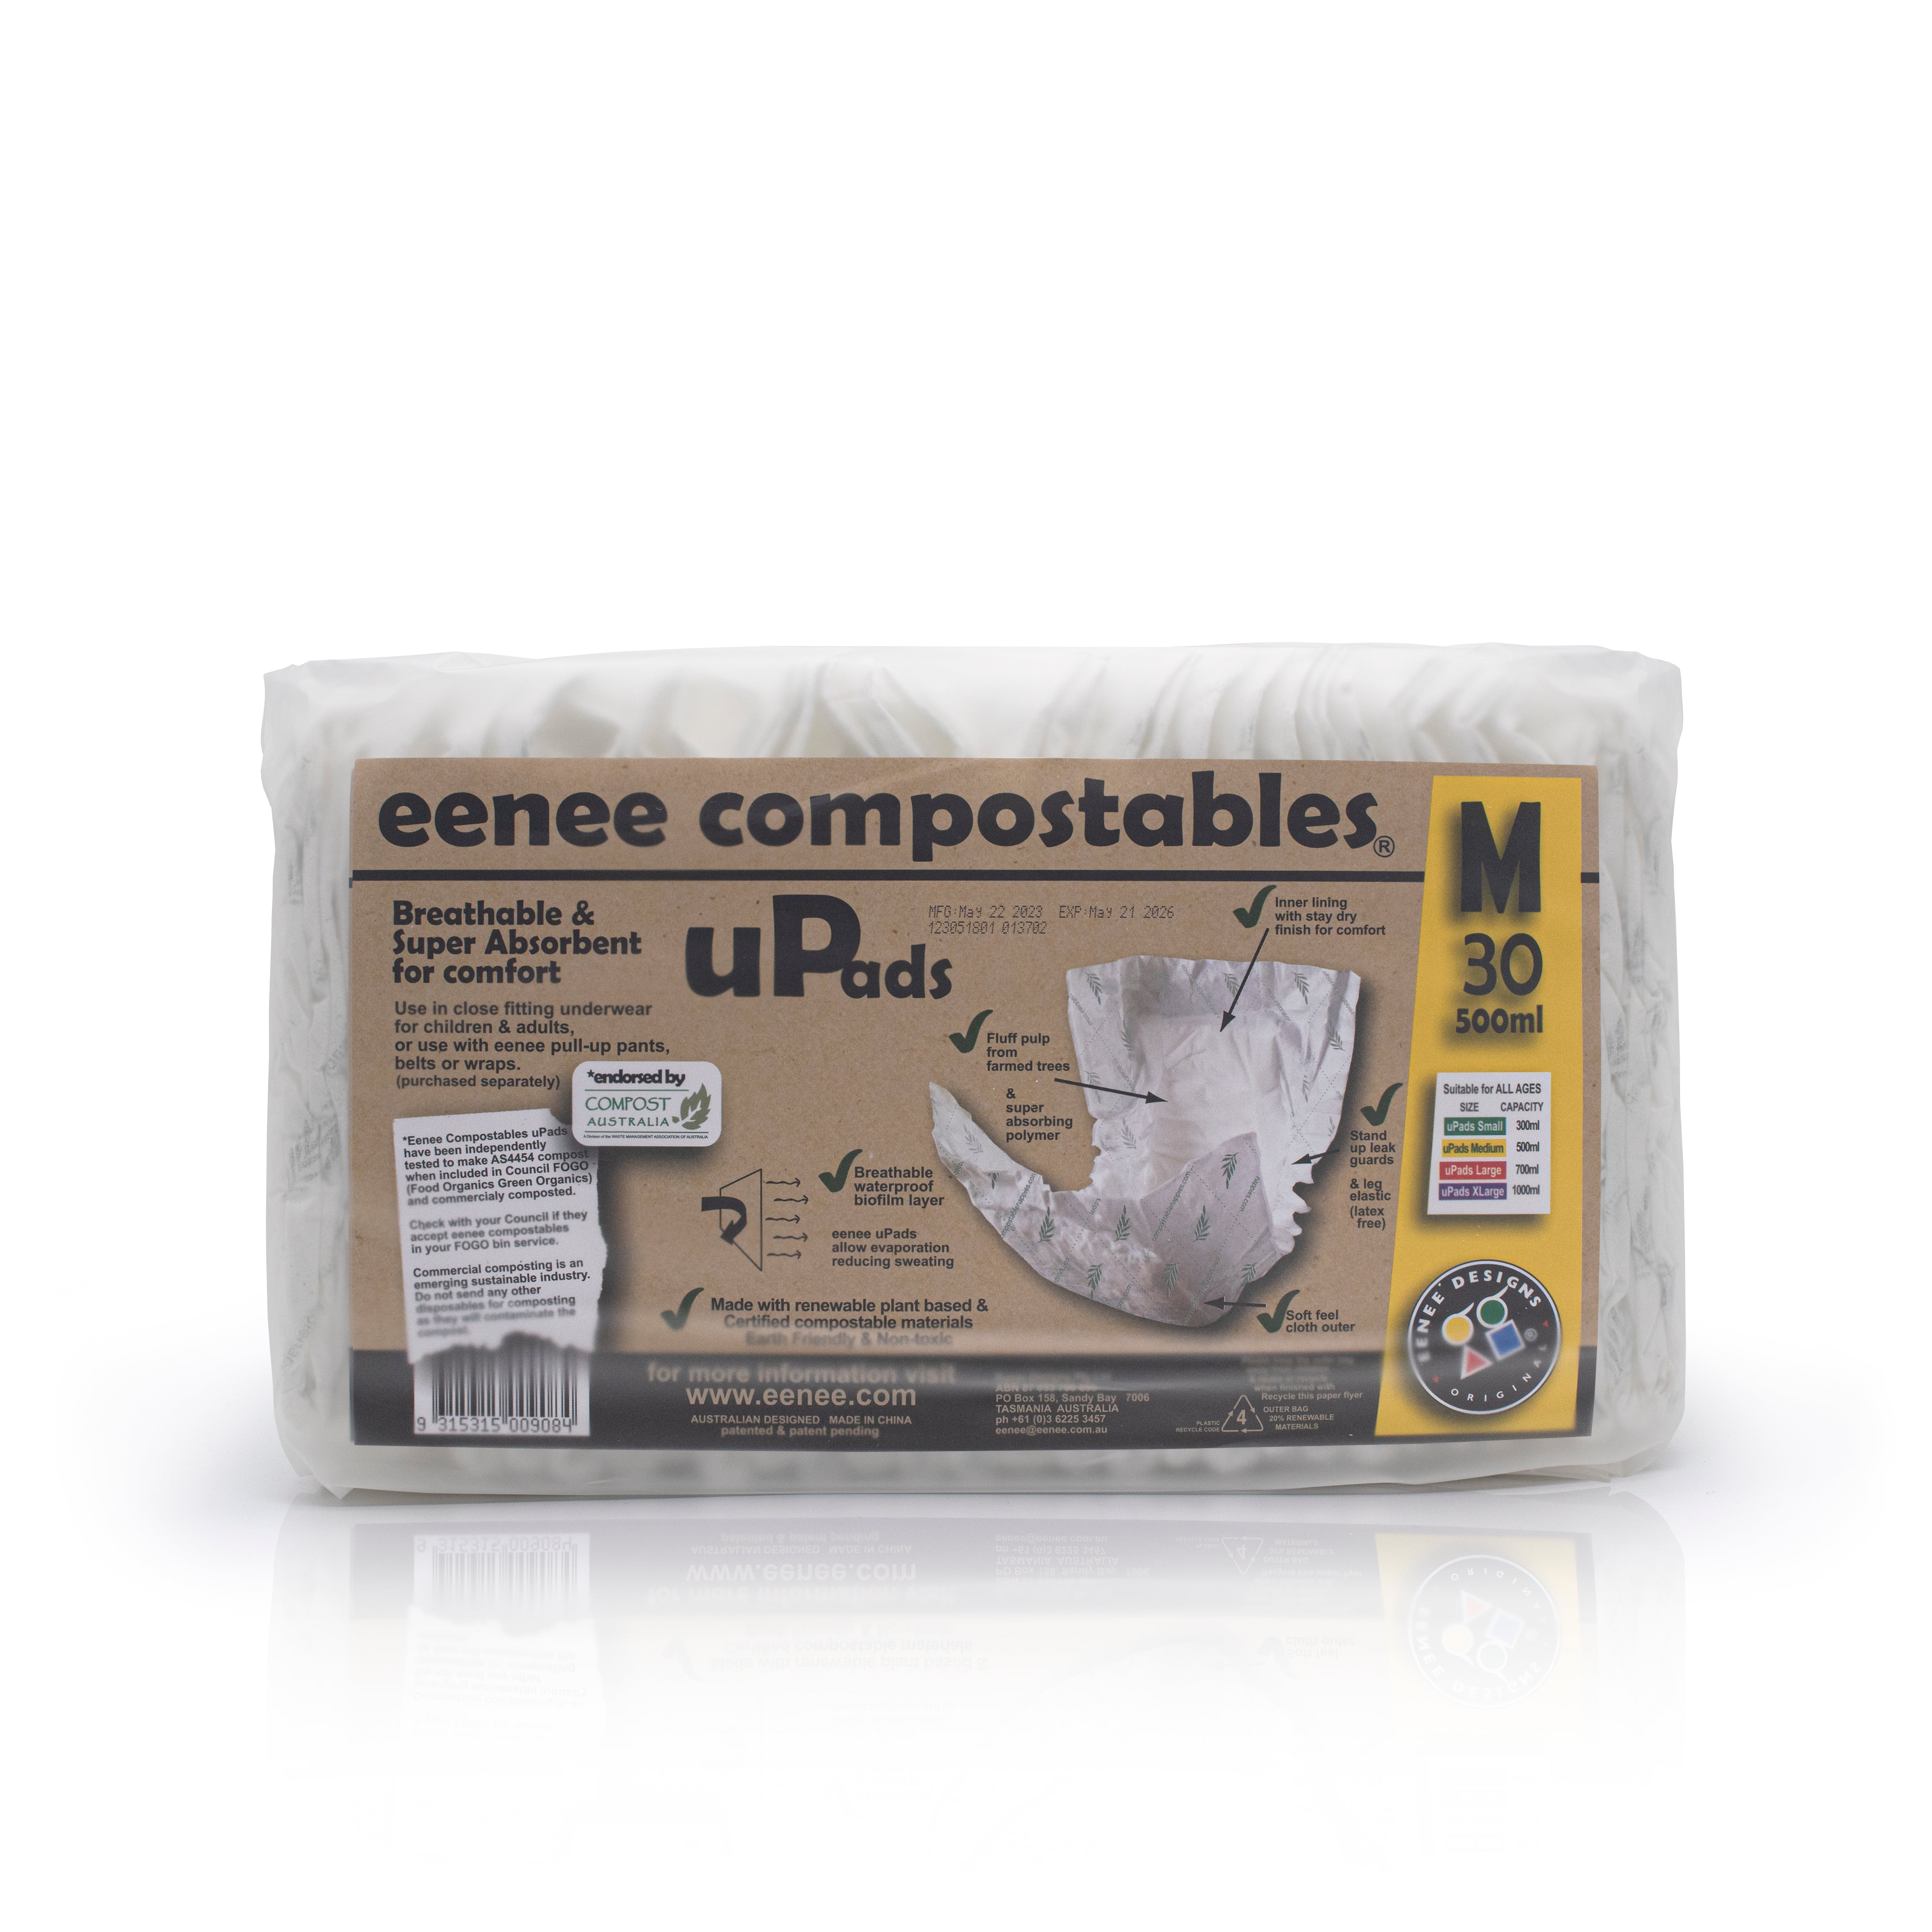 Planet friendly compostable nappy pads for babies